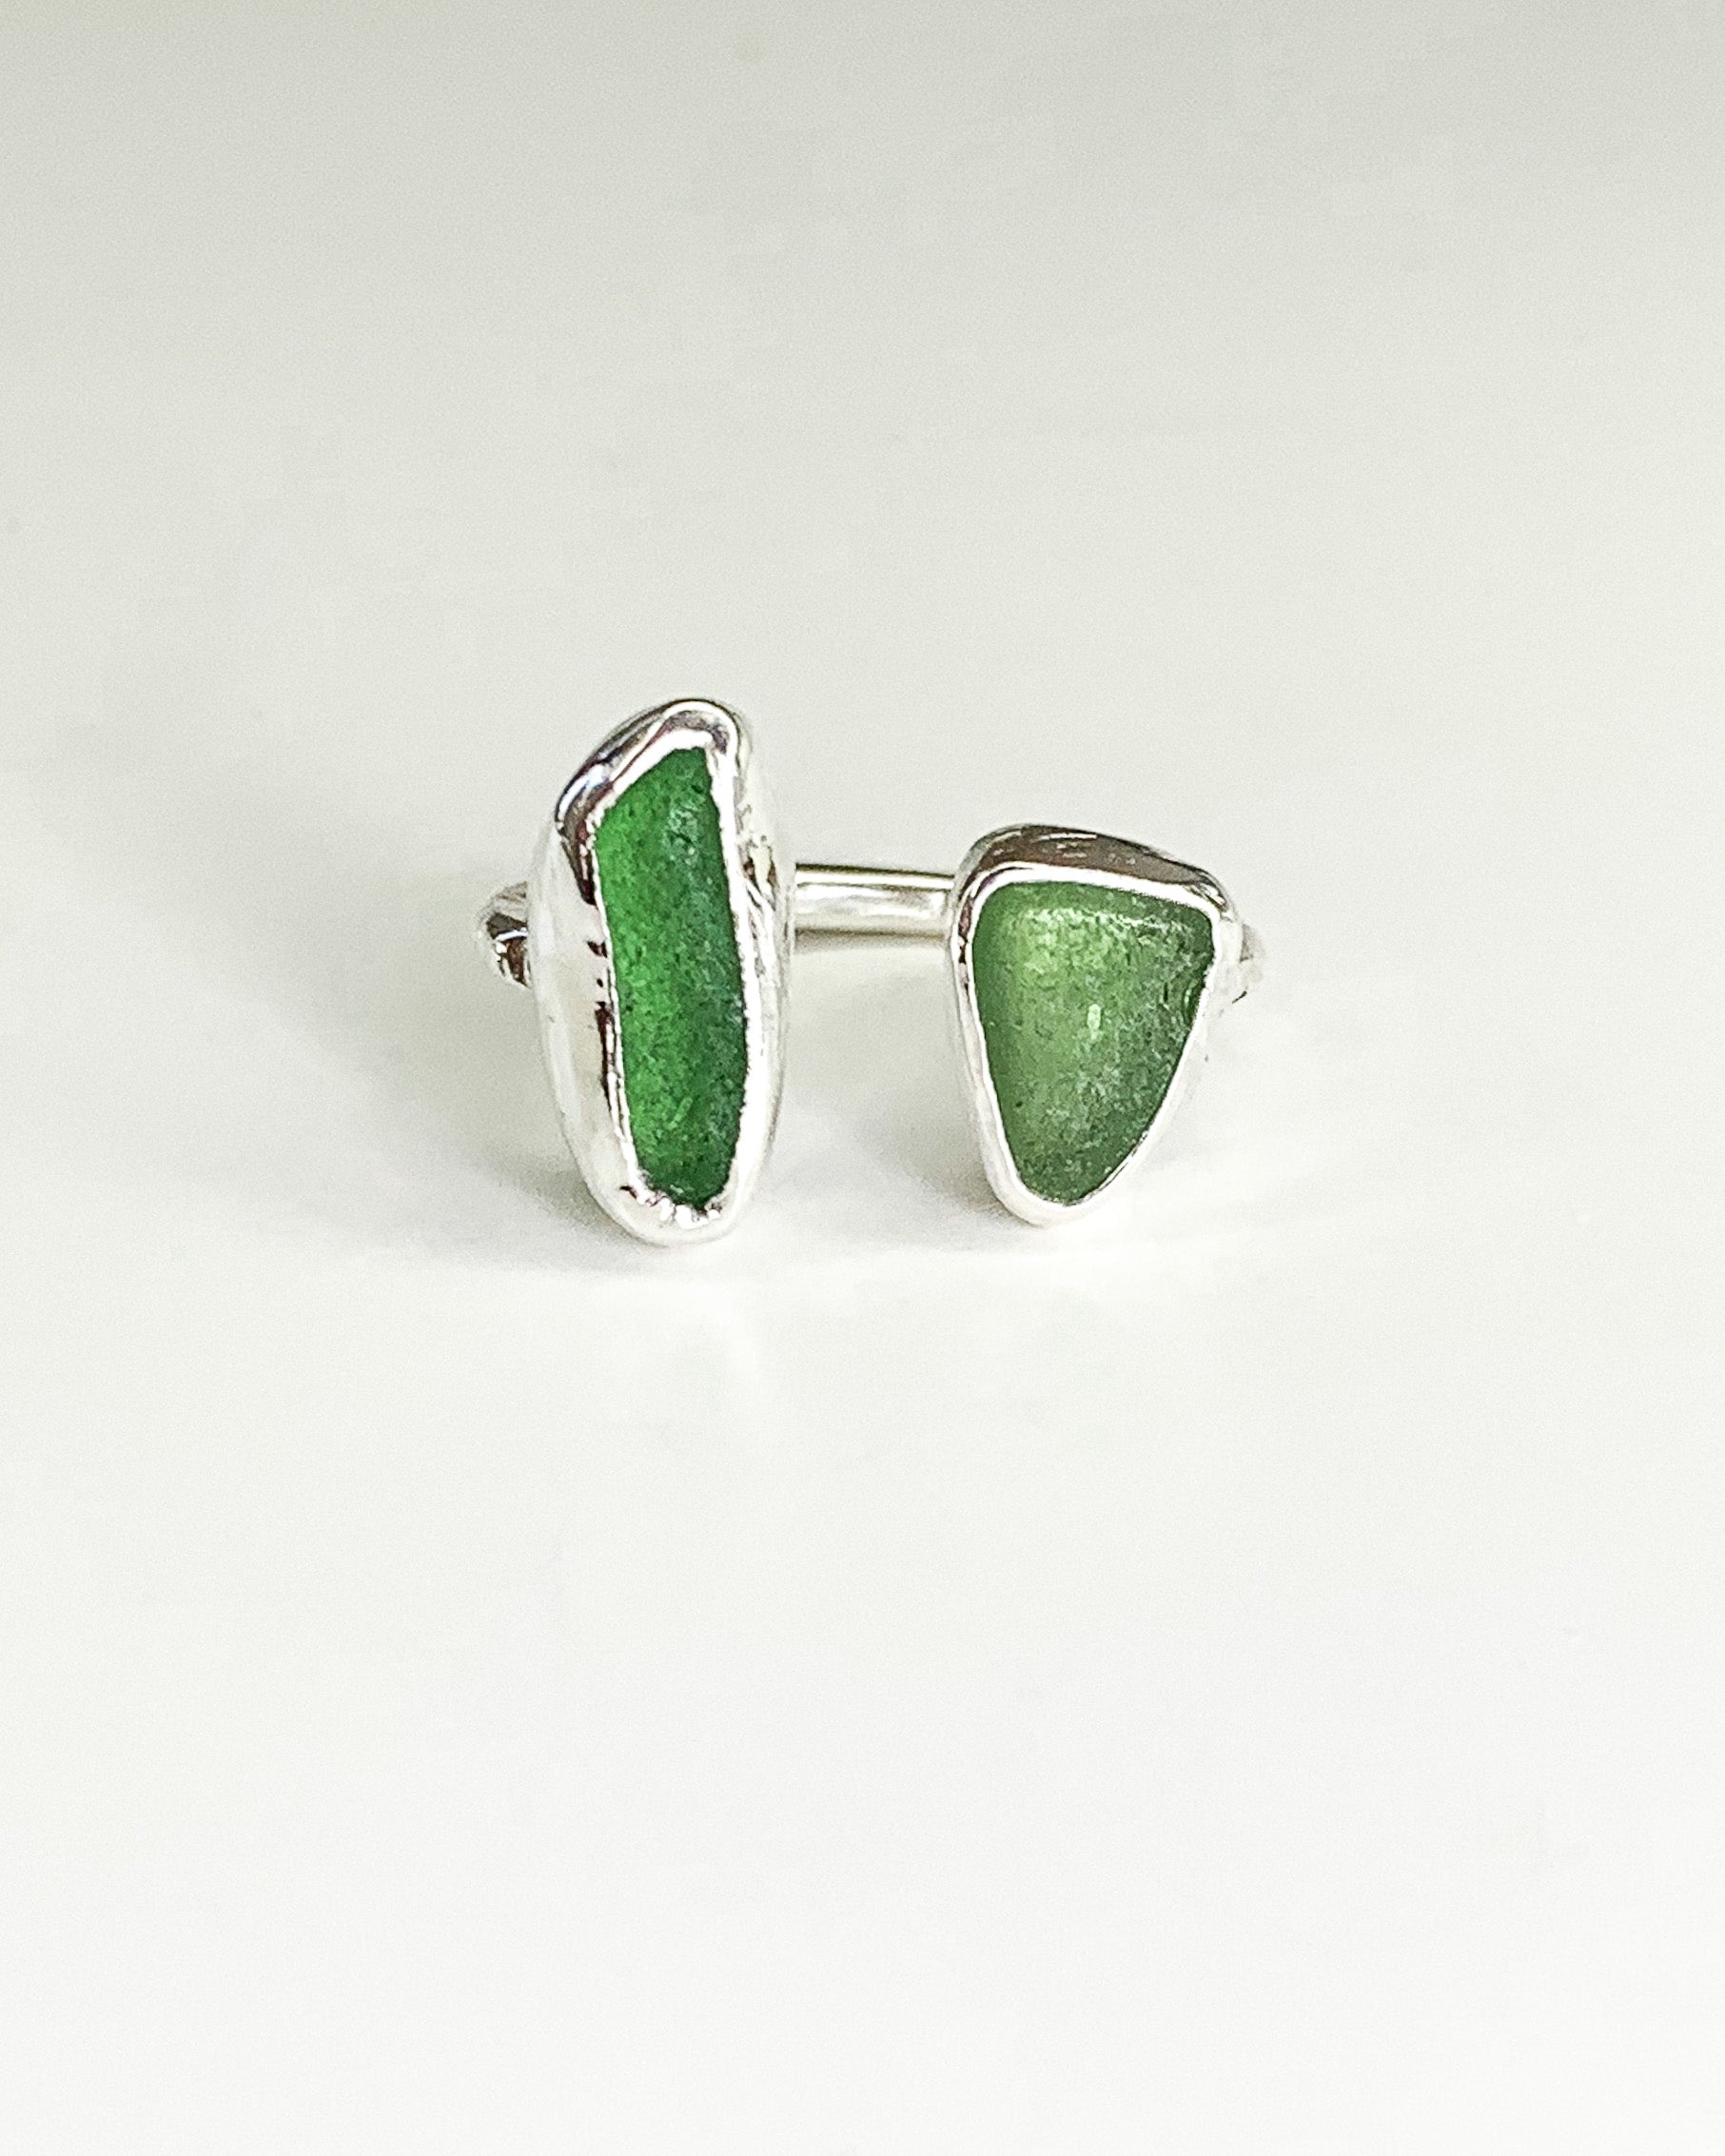 Beach glass ring - size 8-8.5